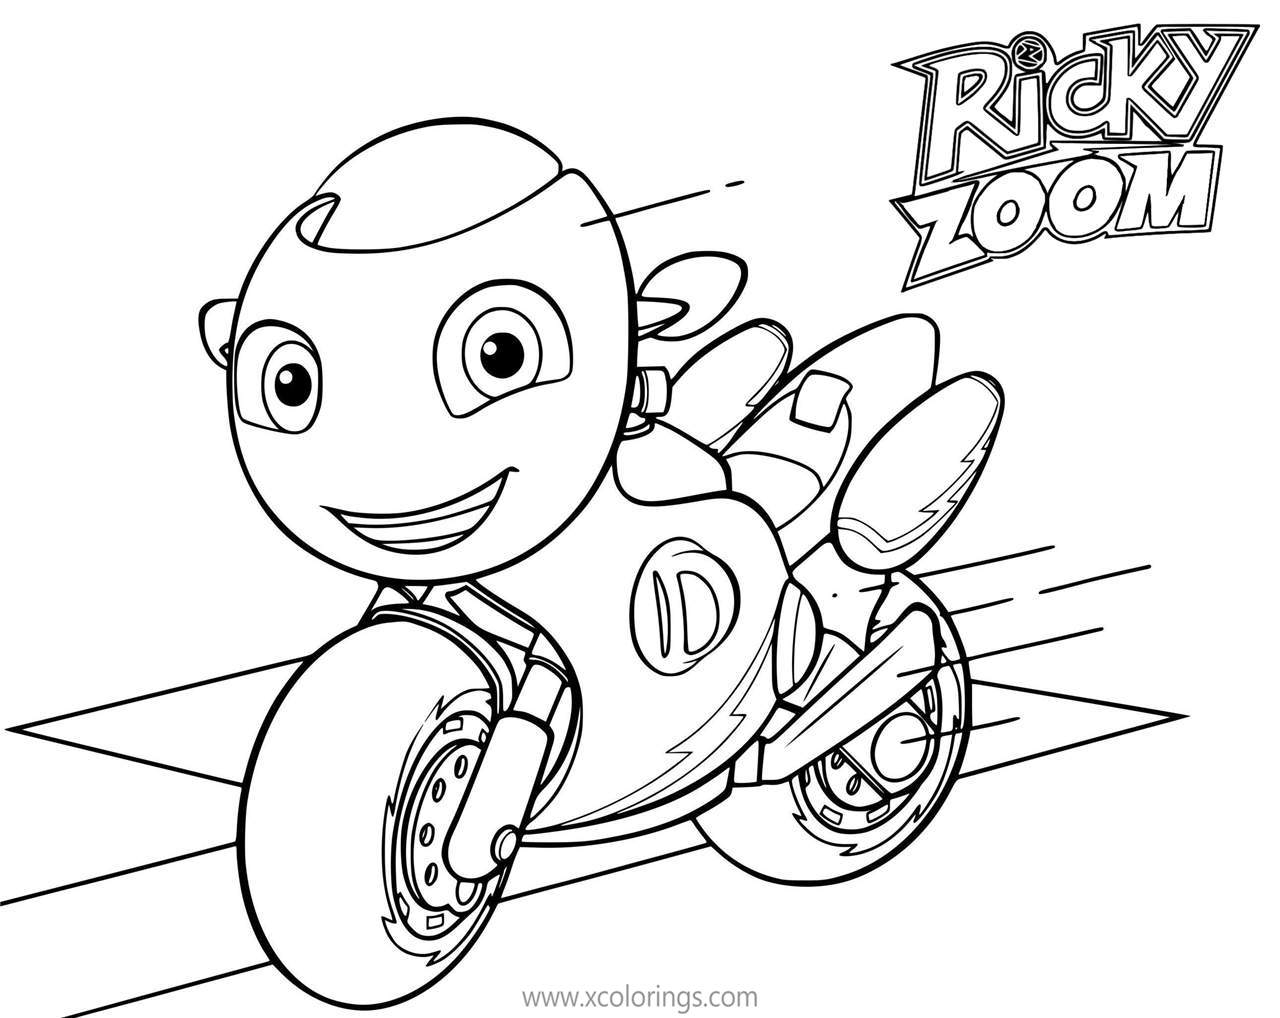 Free Fast Ricky Zoom Coloring Pages printable